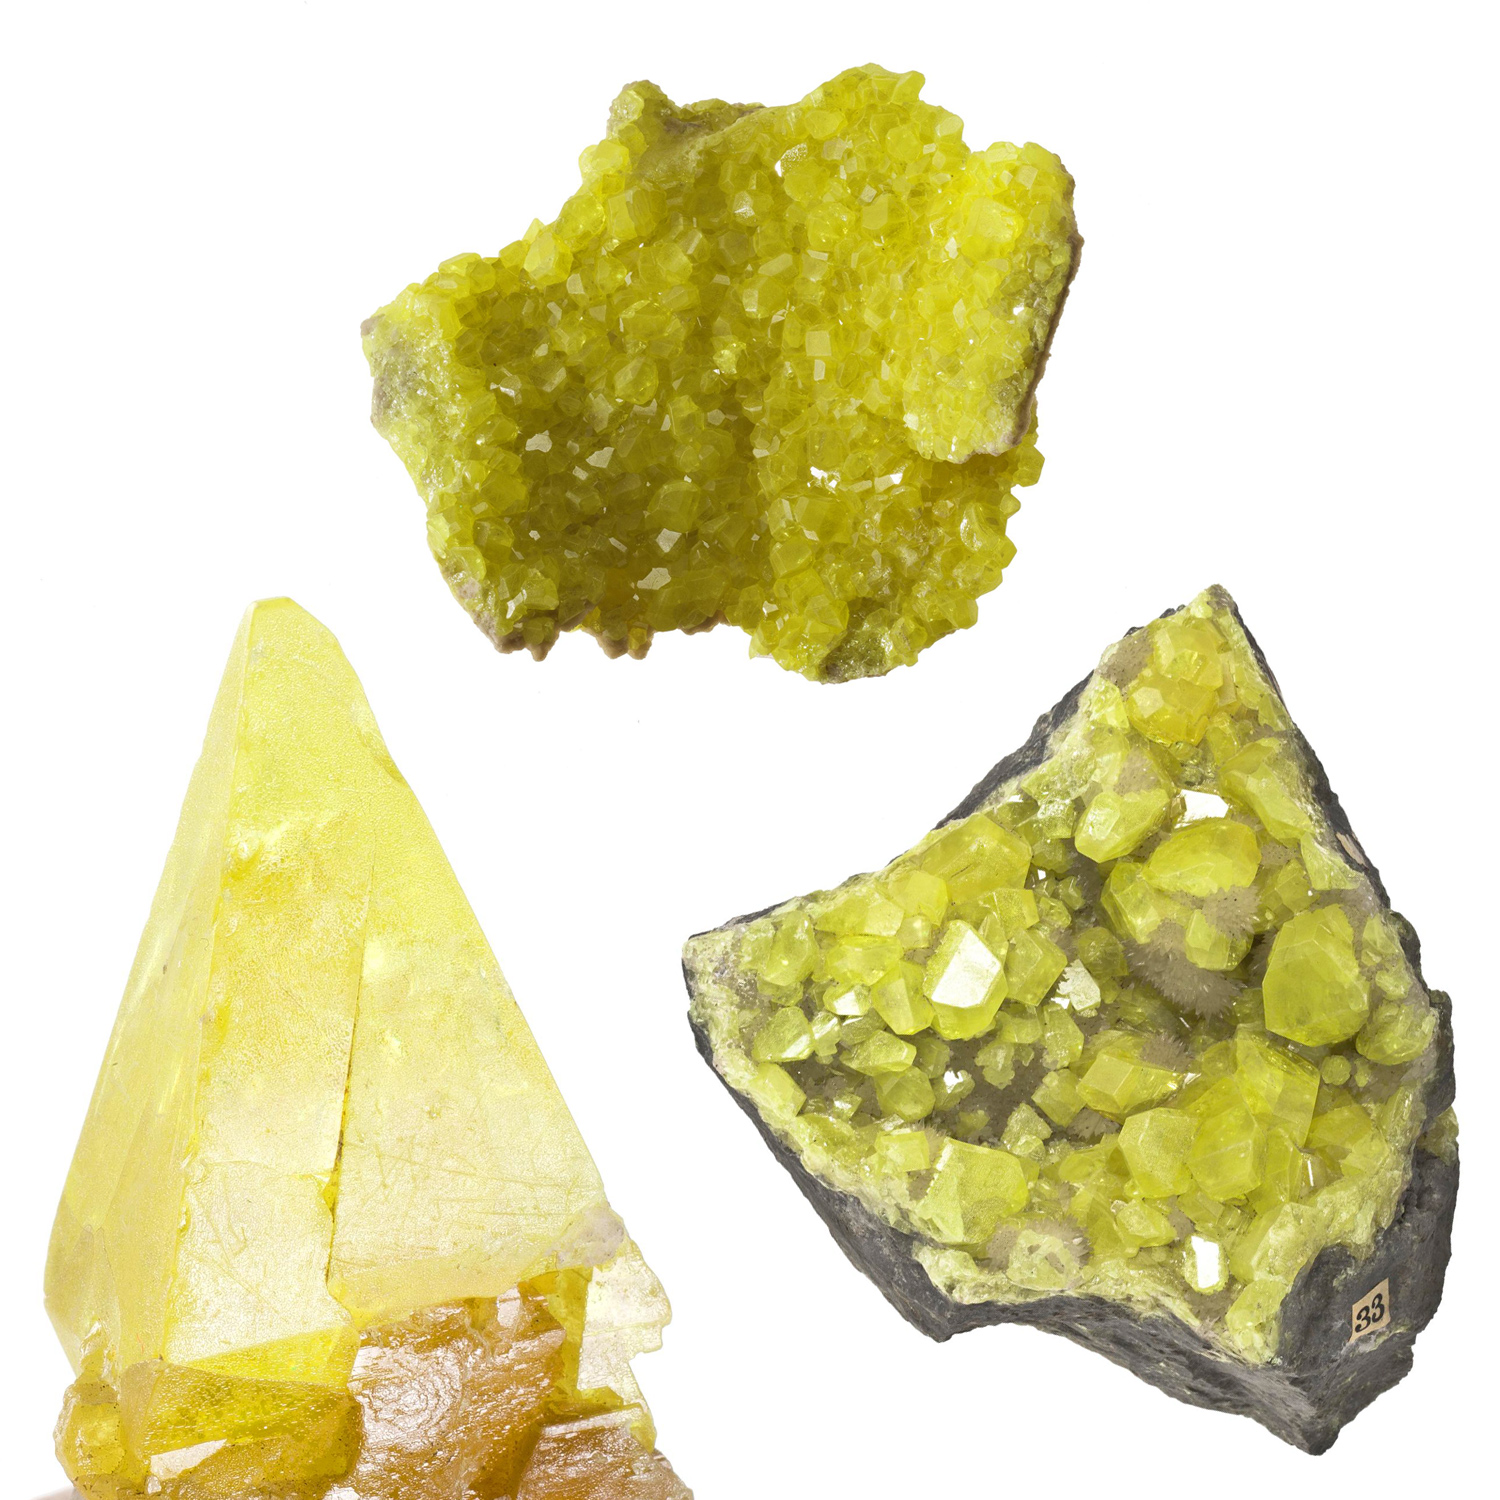 Three samples of sulphur in National Museums Scotland collection from Sicily, Italy. G.1893.84.6, G.1880.62.1, G.1893.114.5.1